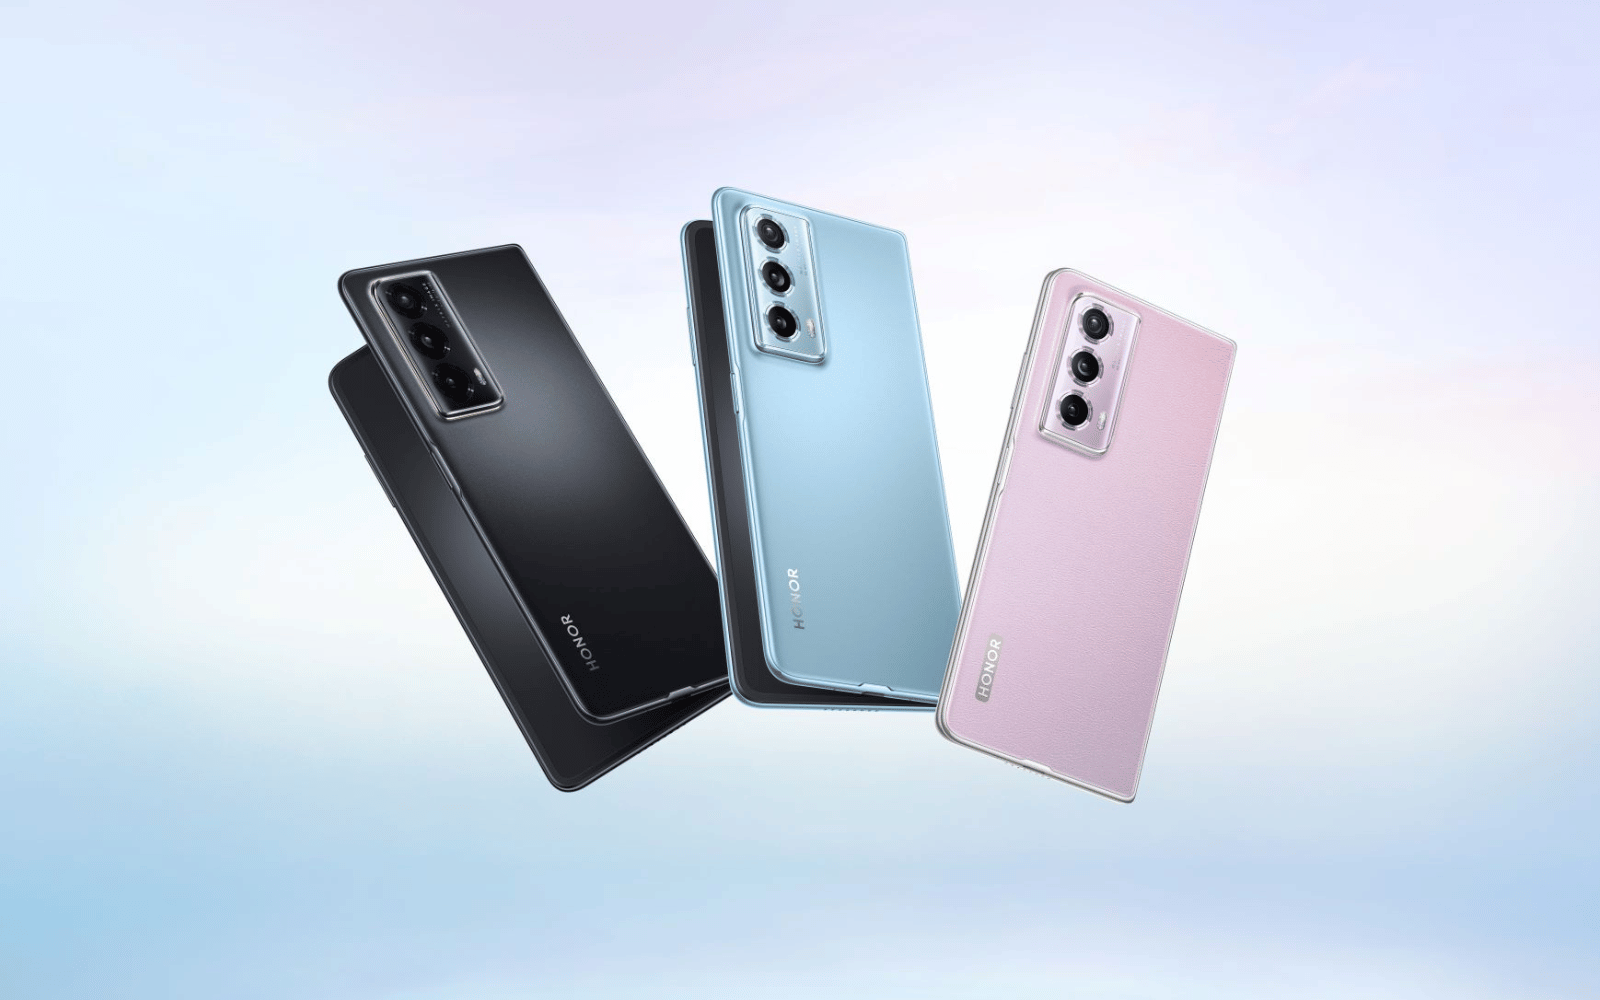 Honor's Magic VS foldable will get a global release starting at